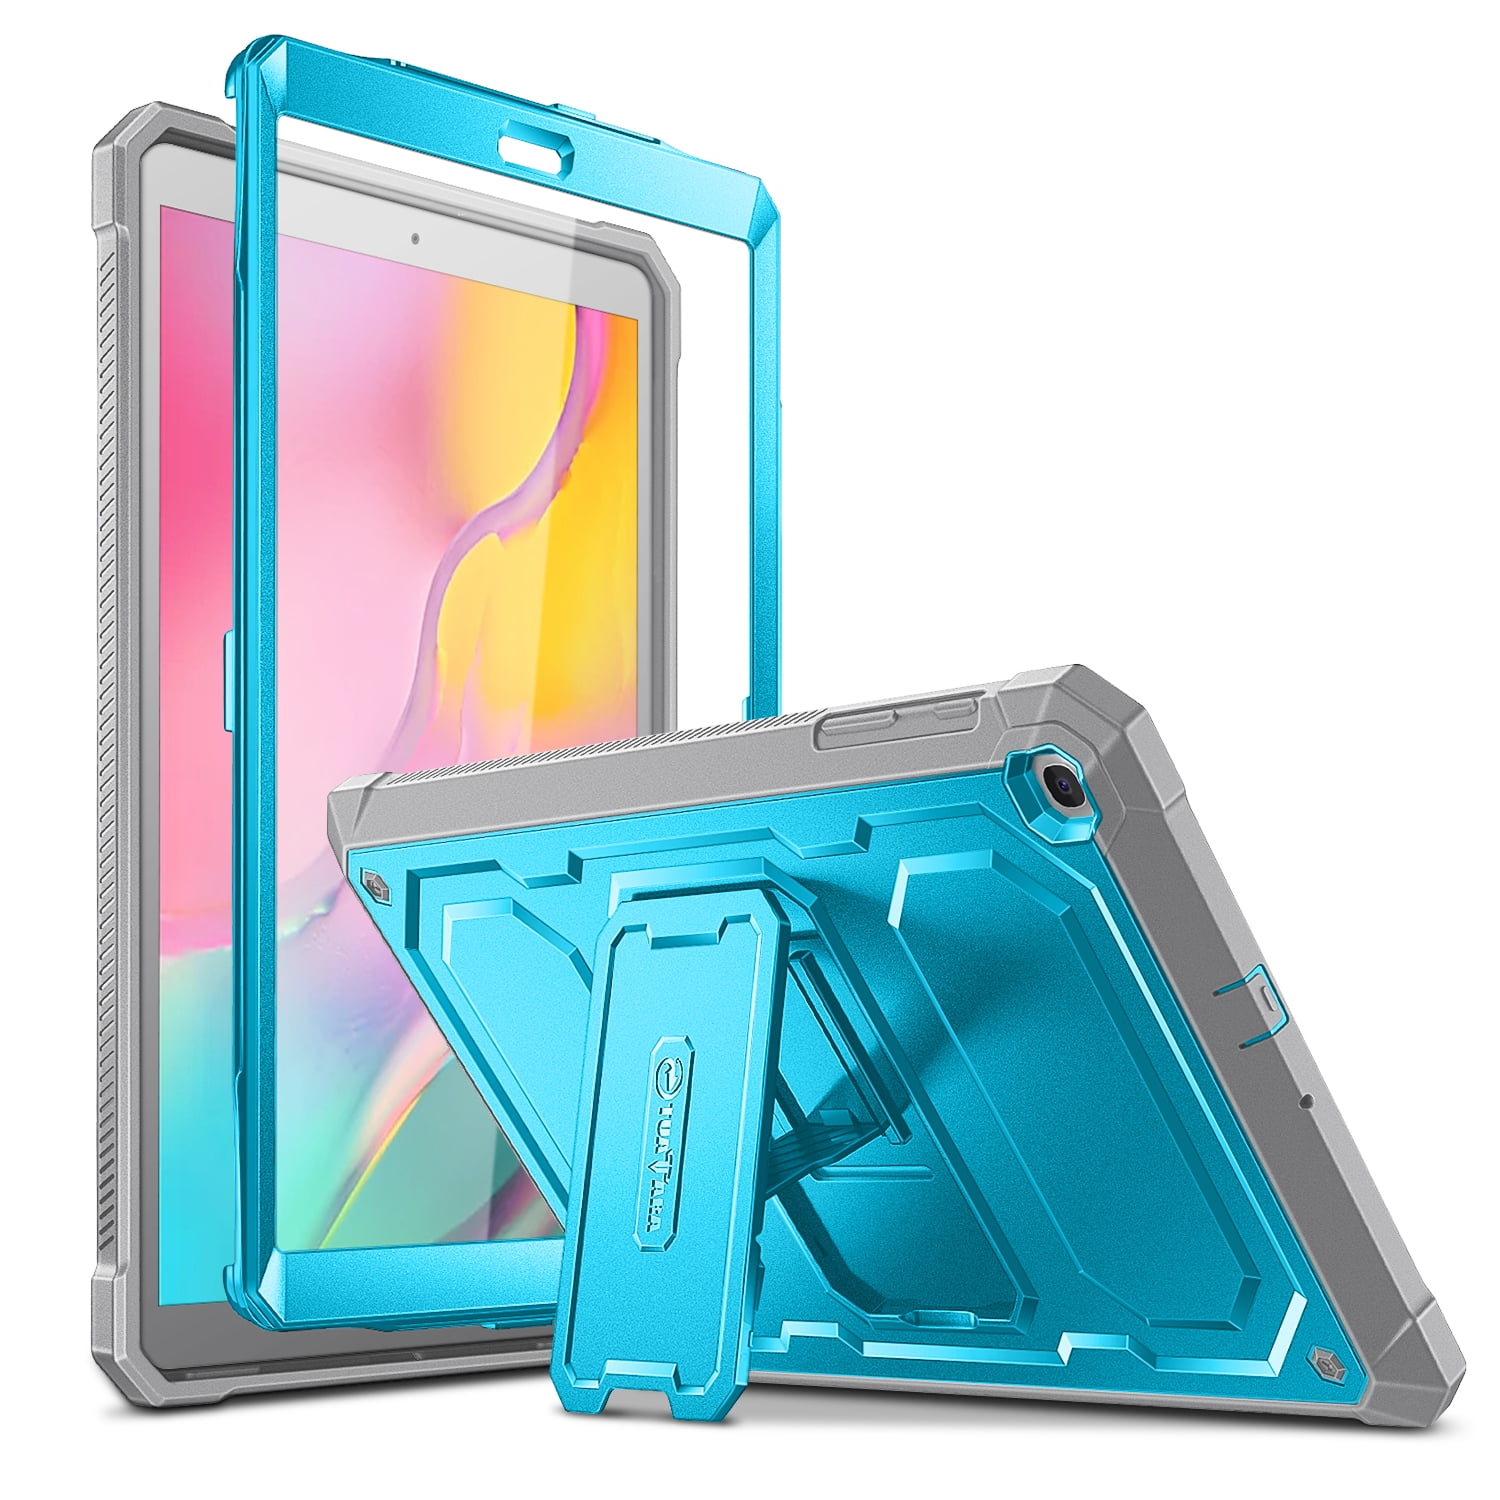 Galaxy Tab A 10.1 SM-T510 Case Grip Stand Shockproof Cover - Walmart.com